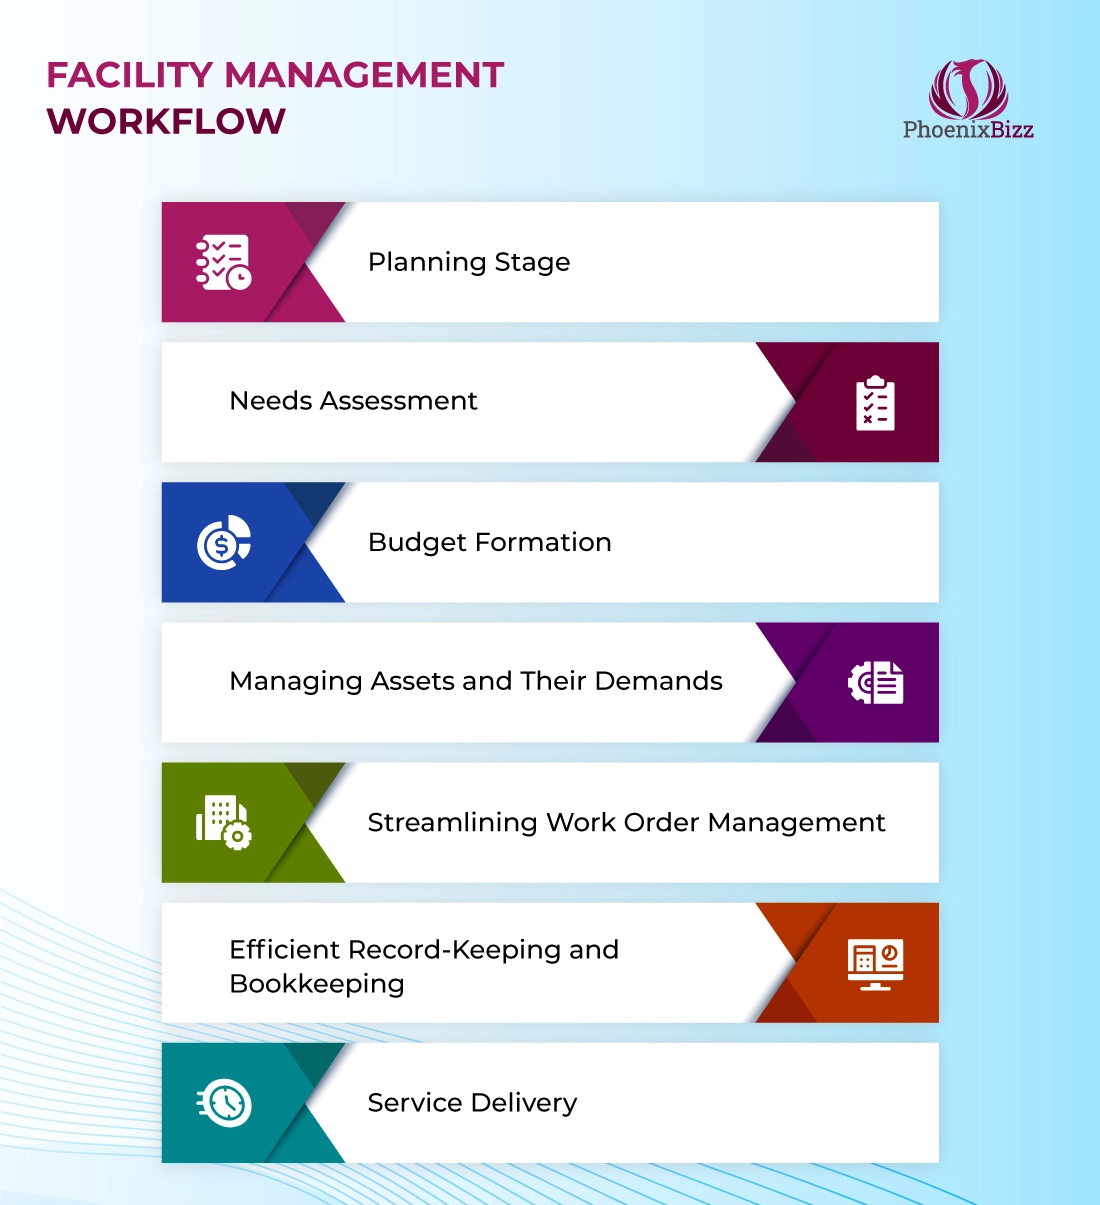 Facility management workflow